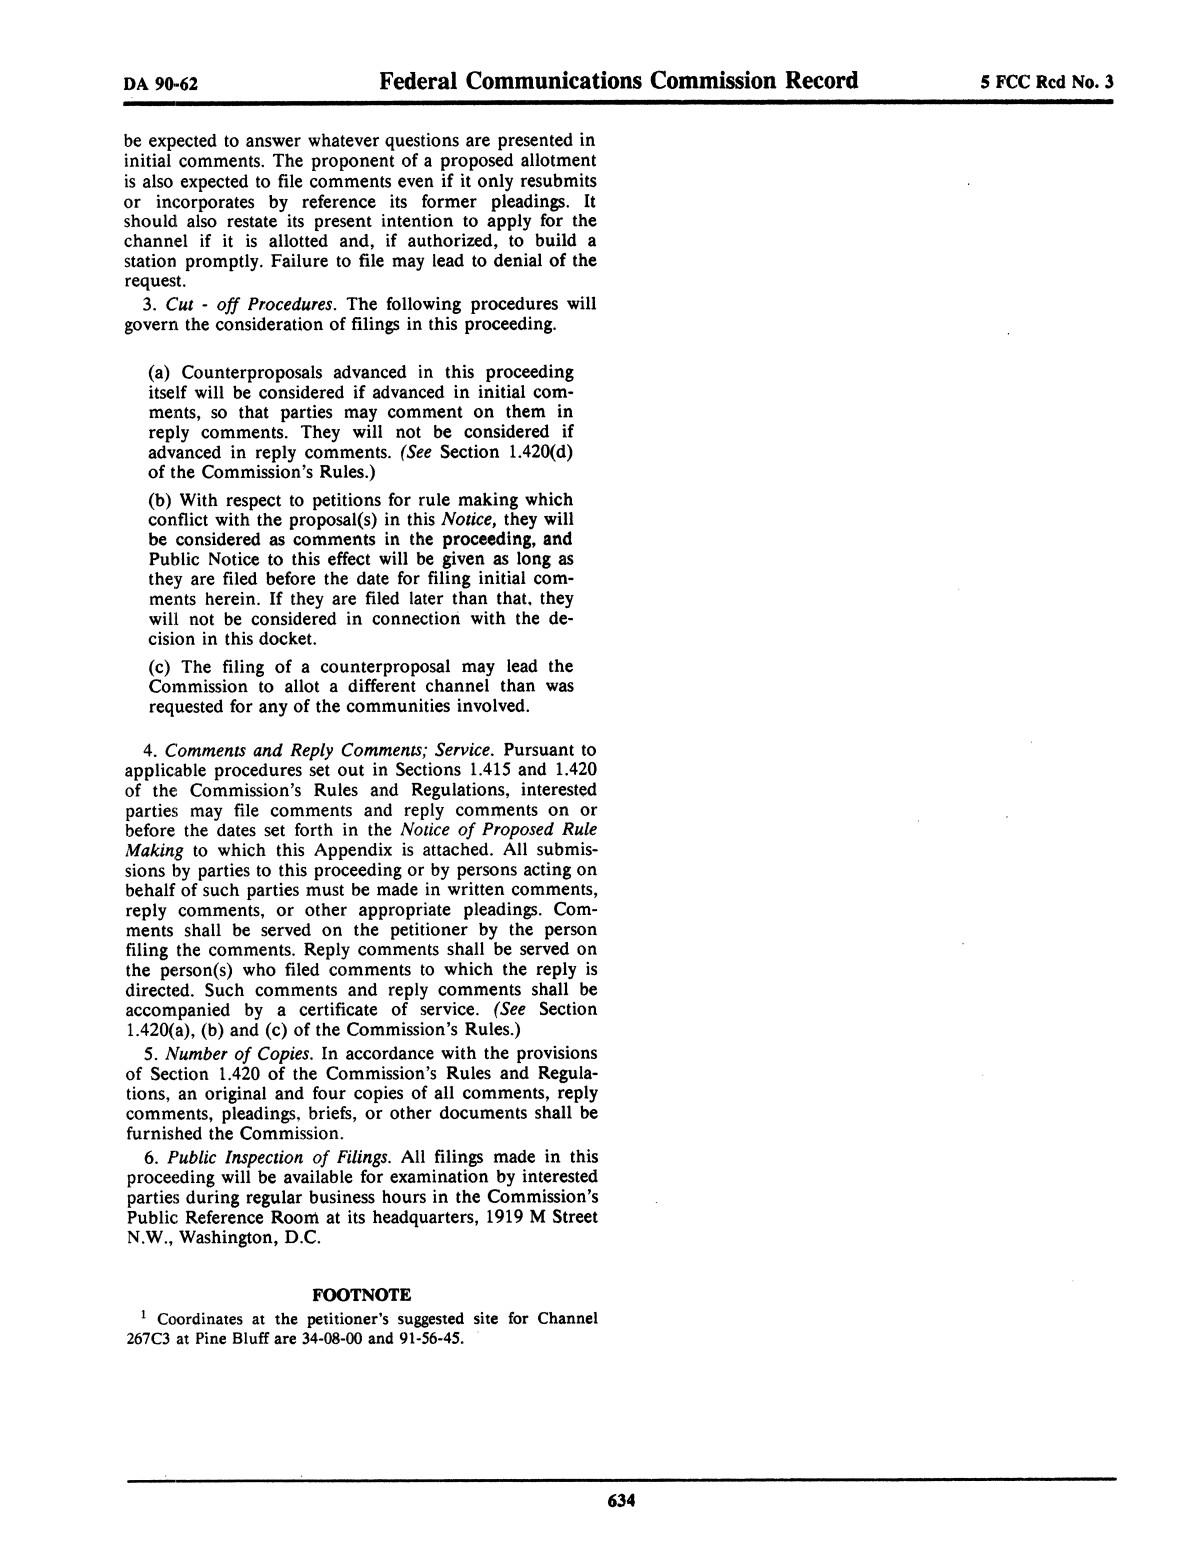 FCC Record, Volume 5, No. 3, Pages 556 to 796, January 29 - February 9, 1990
                                                
                                                    634
                                                